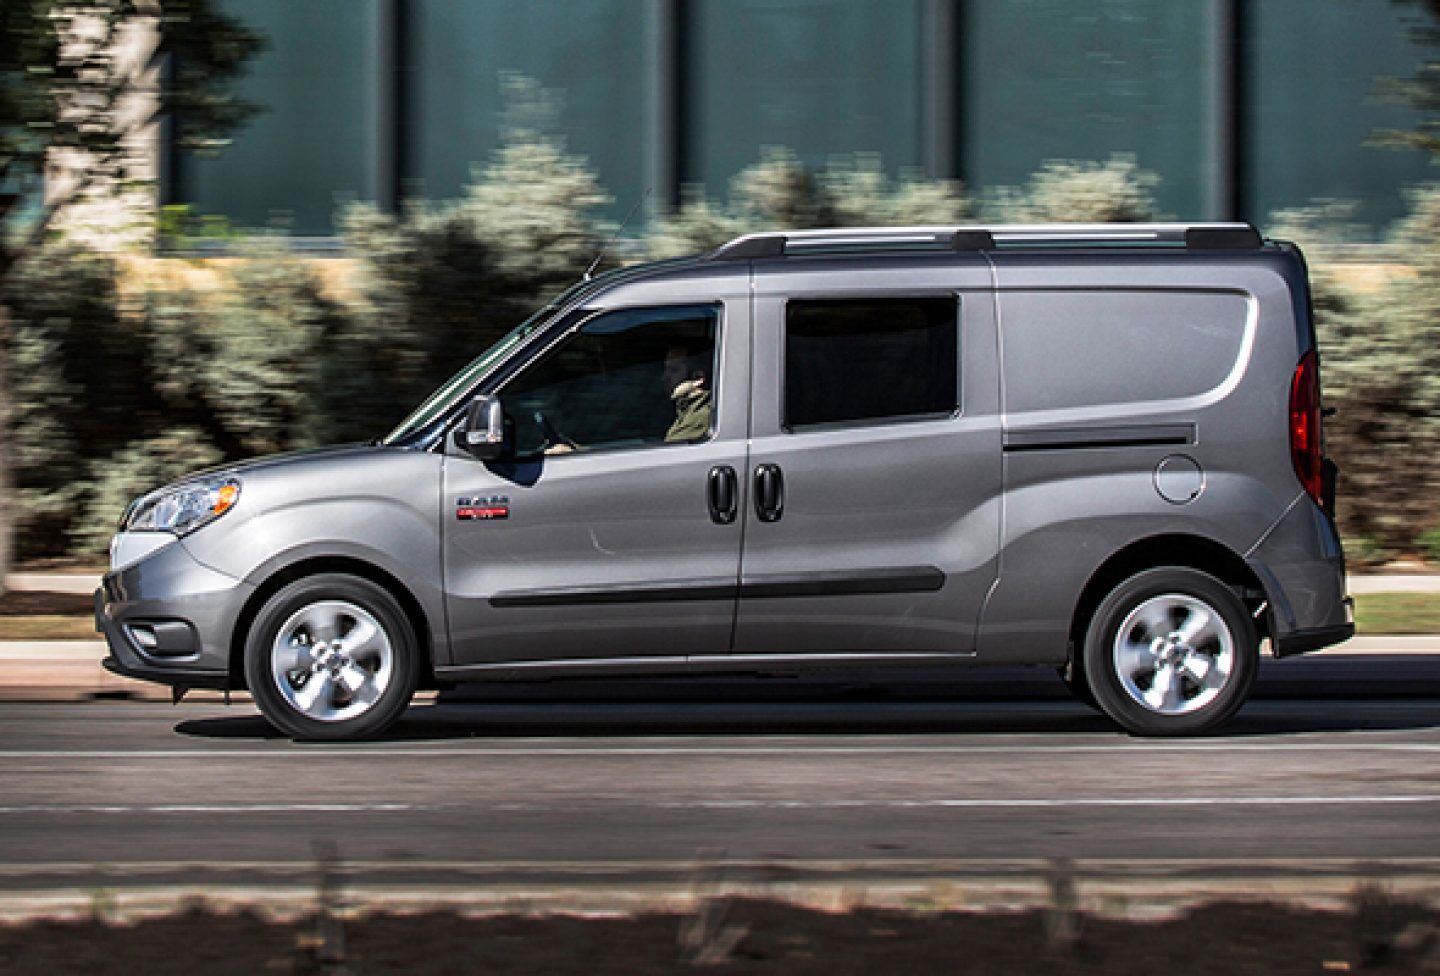 promaster city best in class